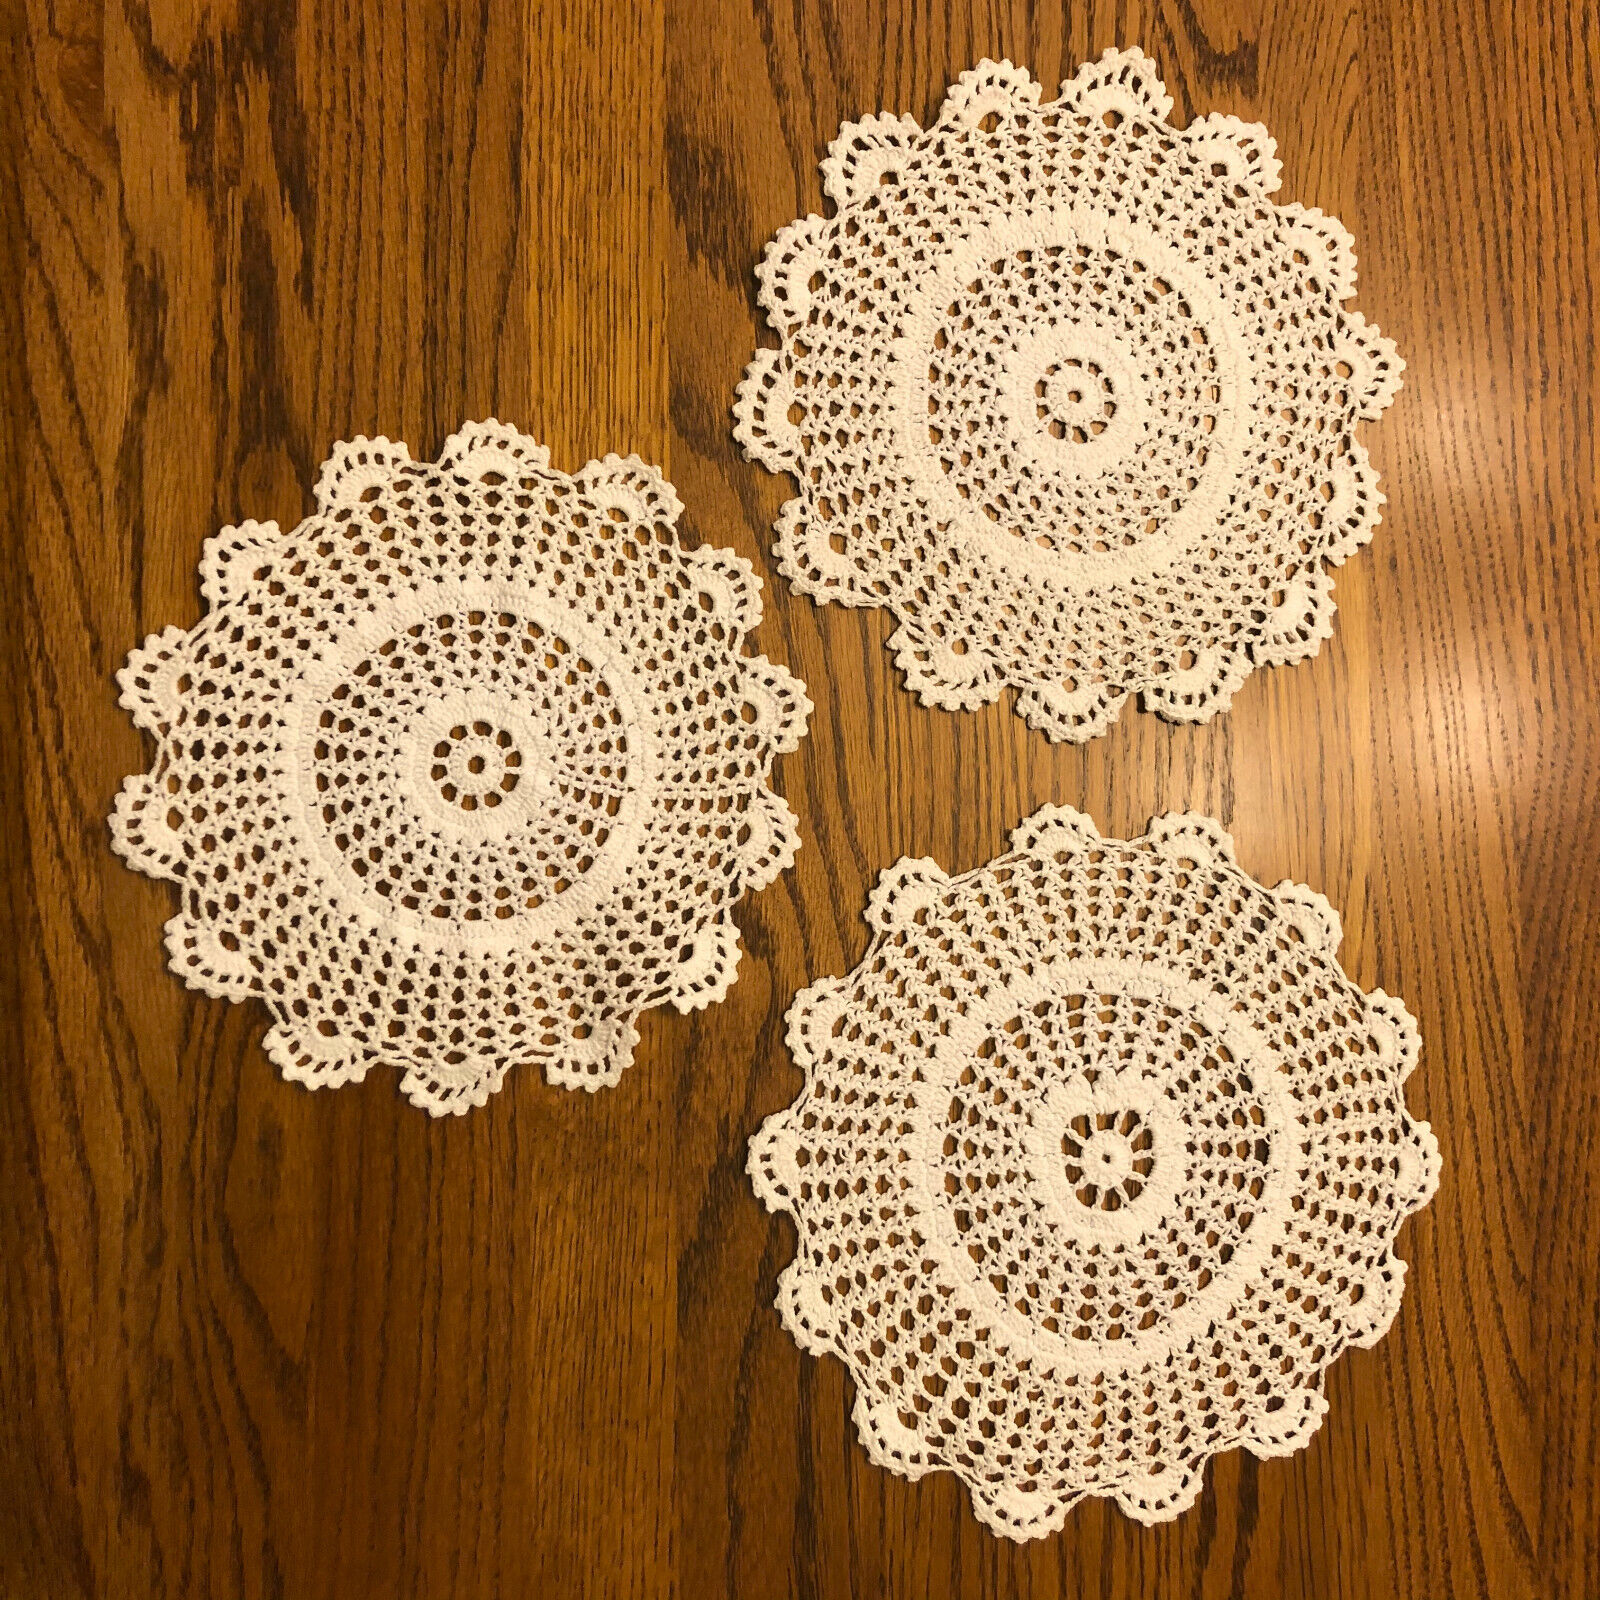 3 Vintage Handmade Crochet Doilies with Scalloped Edges- Beautiful